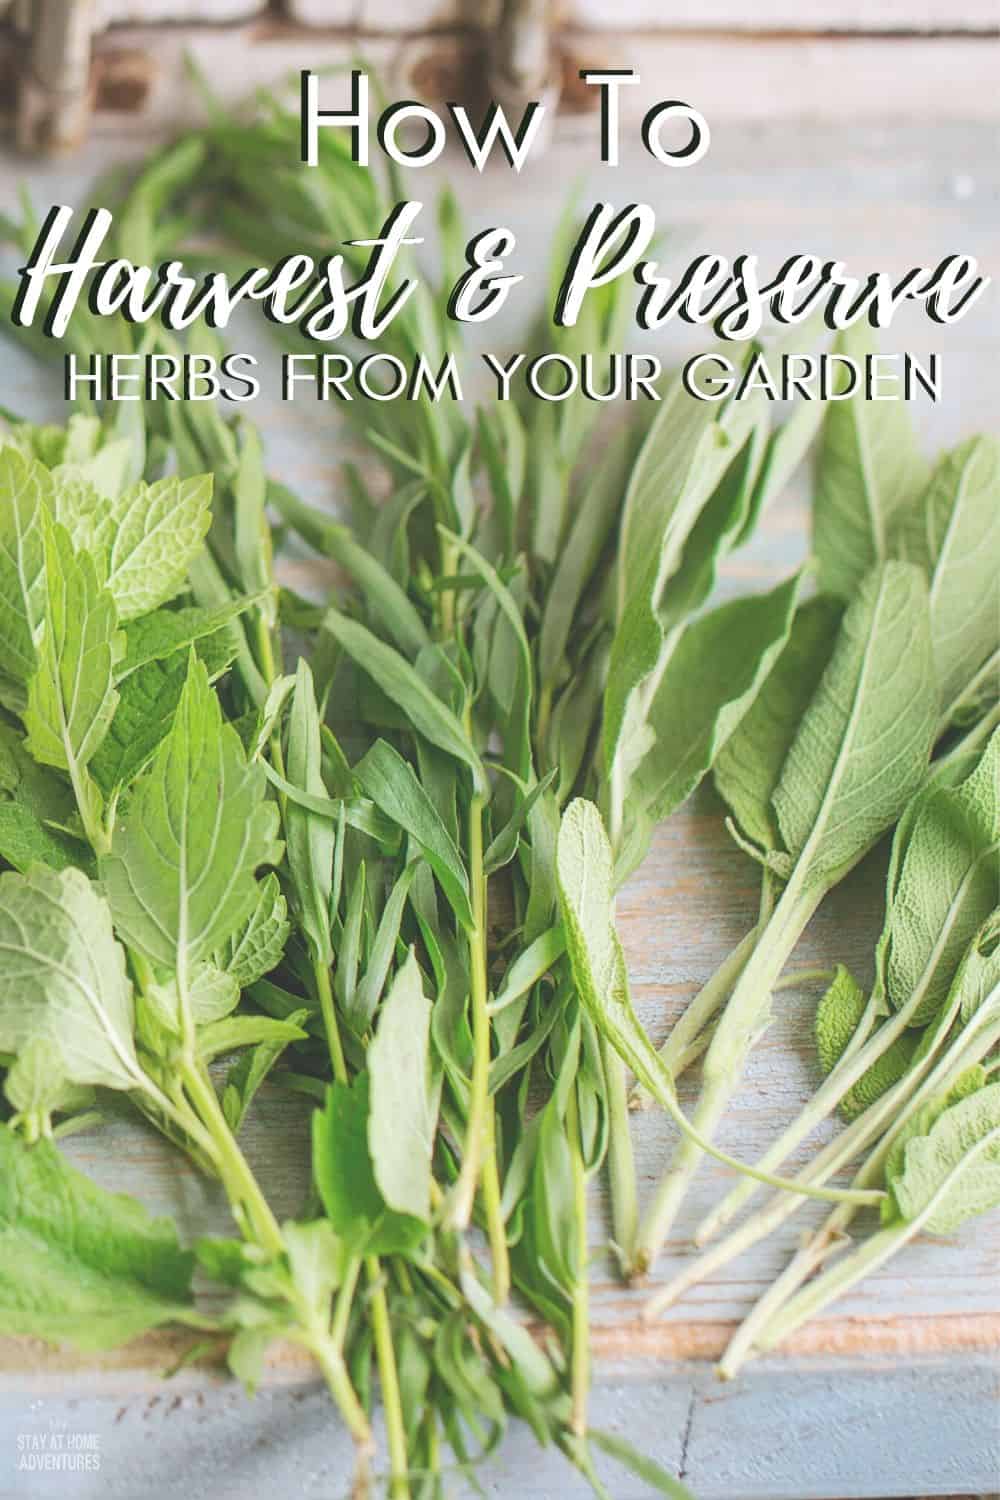 Follow these simple tips to learn how to harvest and store fresh herbs from your garden. Enjoy the delicious flavor of fresh herbs all year! #gardeningtips #herbgarden #harvestherbs via @mystayathome